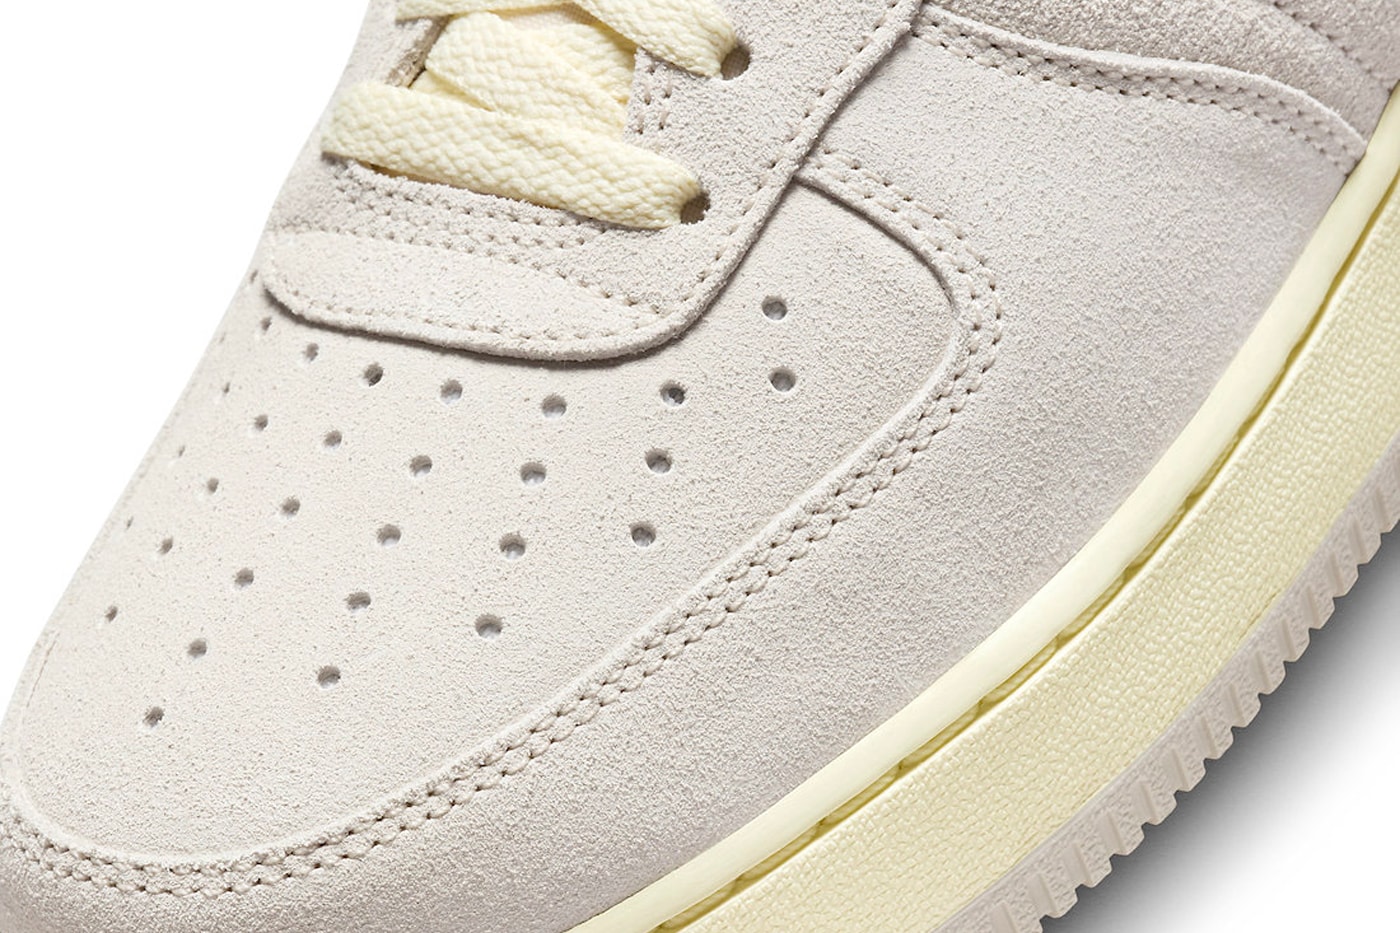 Nike Air Force 1 Low "Athletic Department" Has Officially Released FQ8077-104 Light Orewood Brown/Coconut Milk-Deep Jungle-Sail